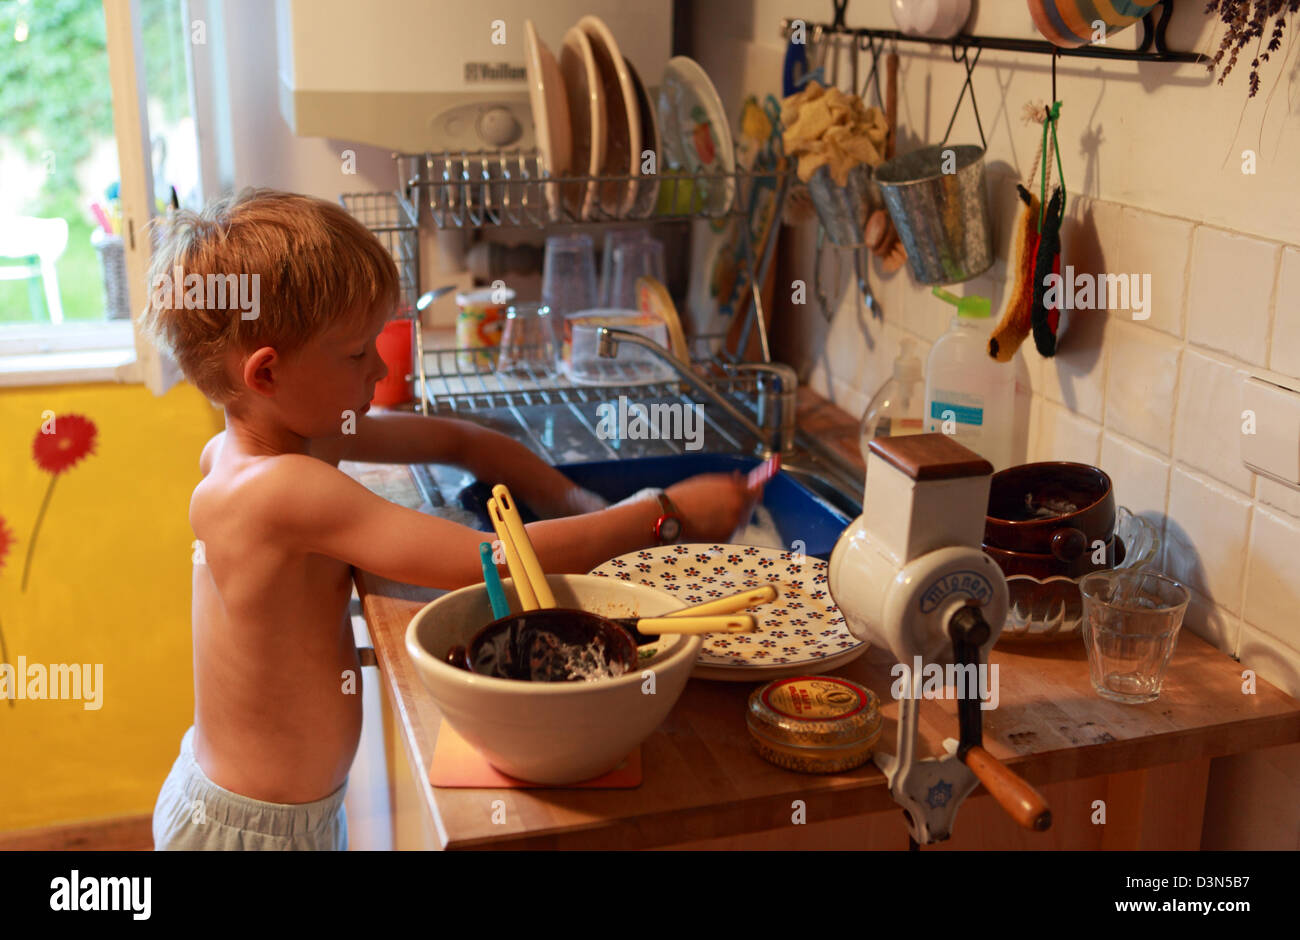 Berlin, Germany, boy washes dishes Stock Photo